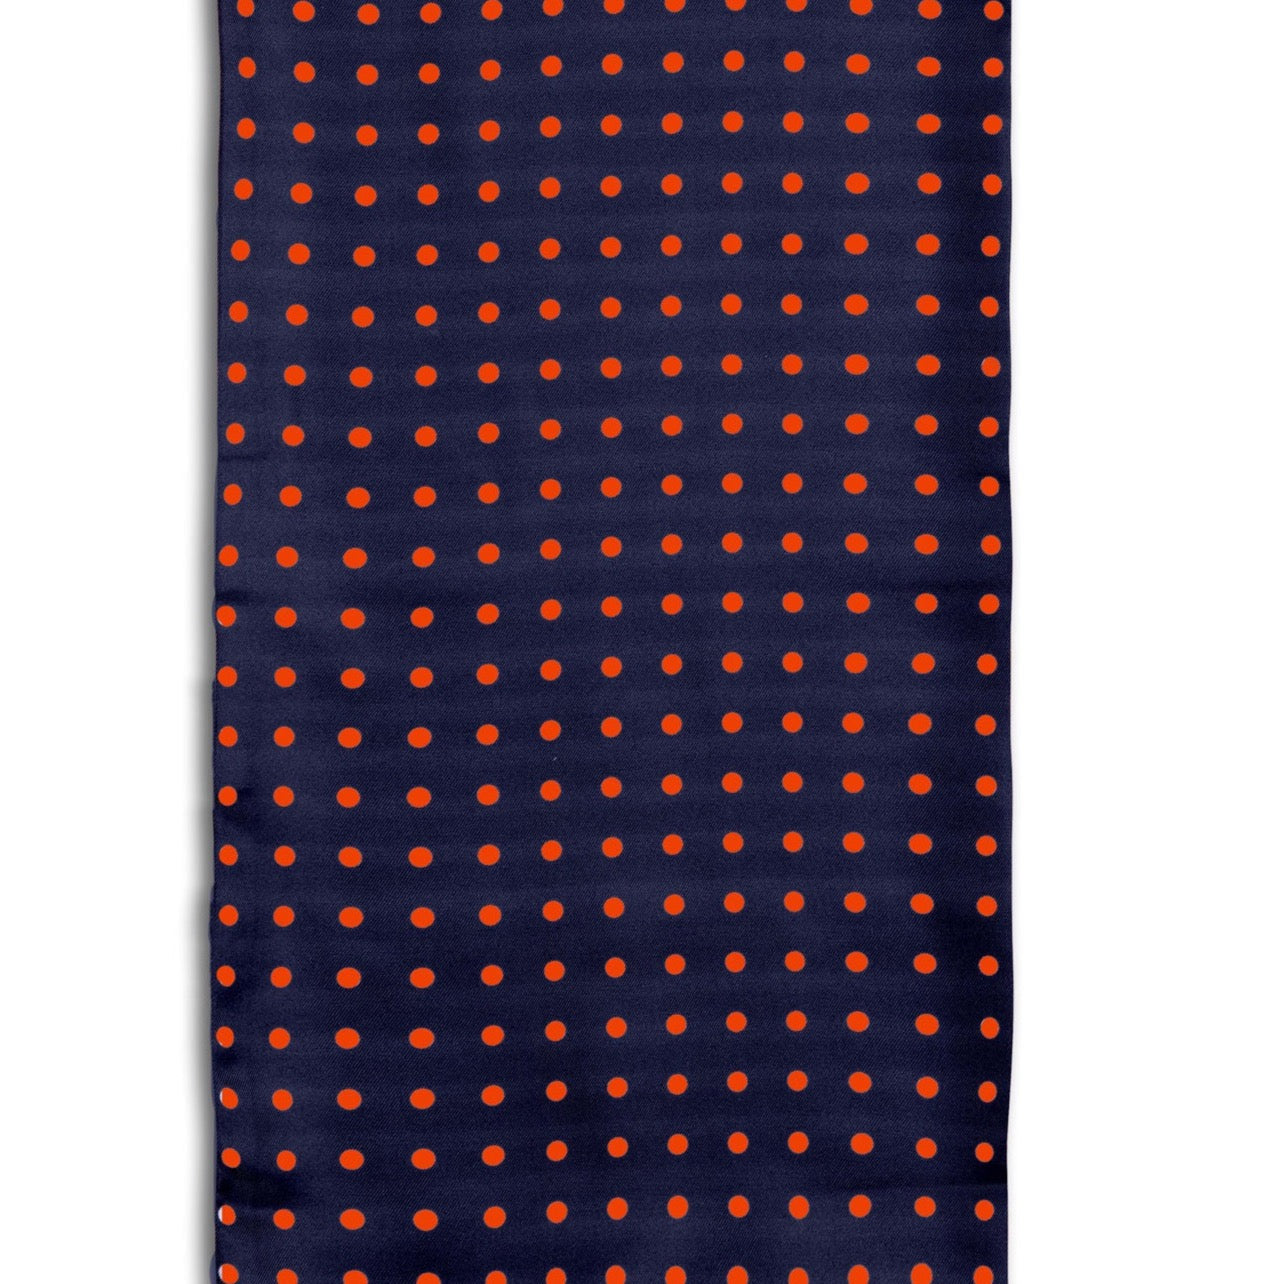 Close-up view of 'The Grand' polka-dot polyester scarf arranged in a rectangular shape, clearly showing the navy coloured fabric with red dots.